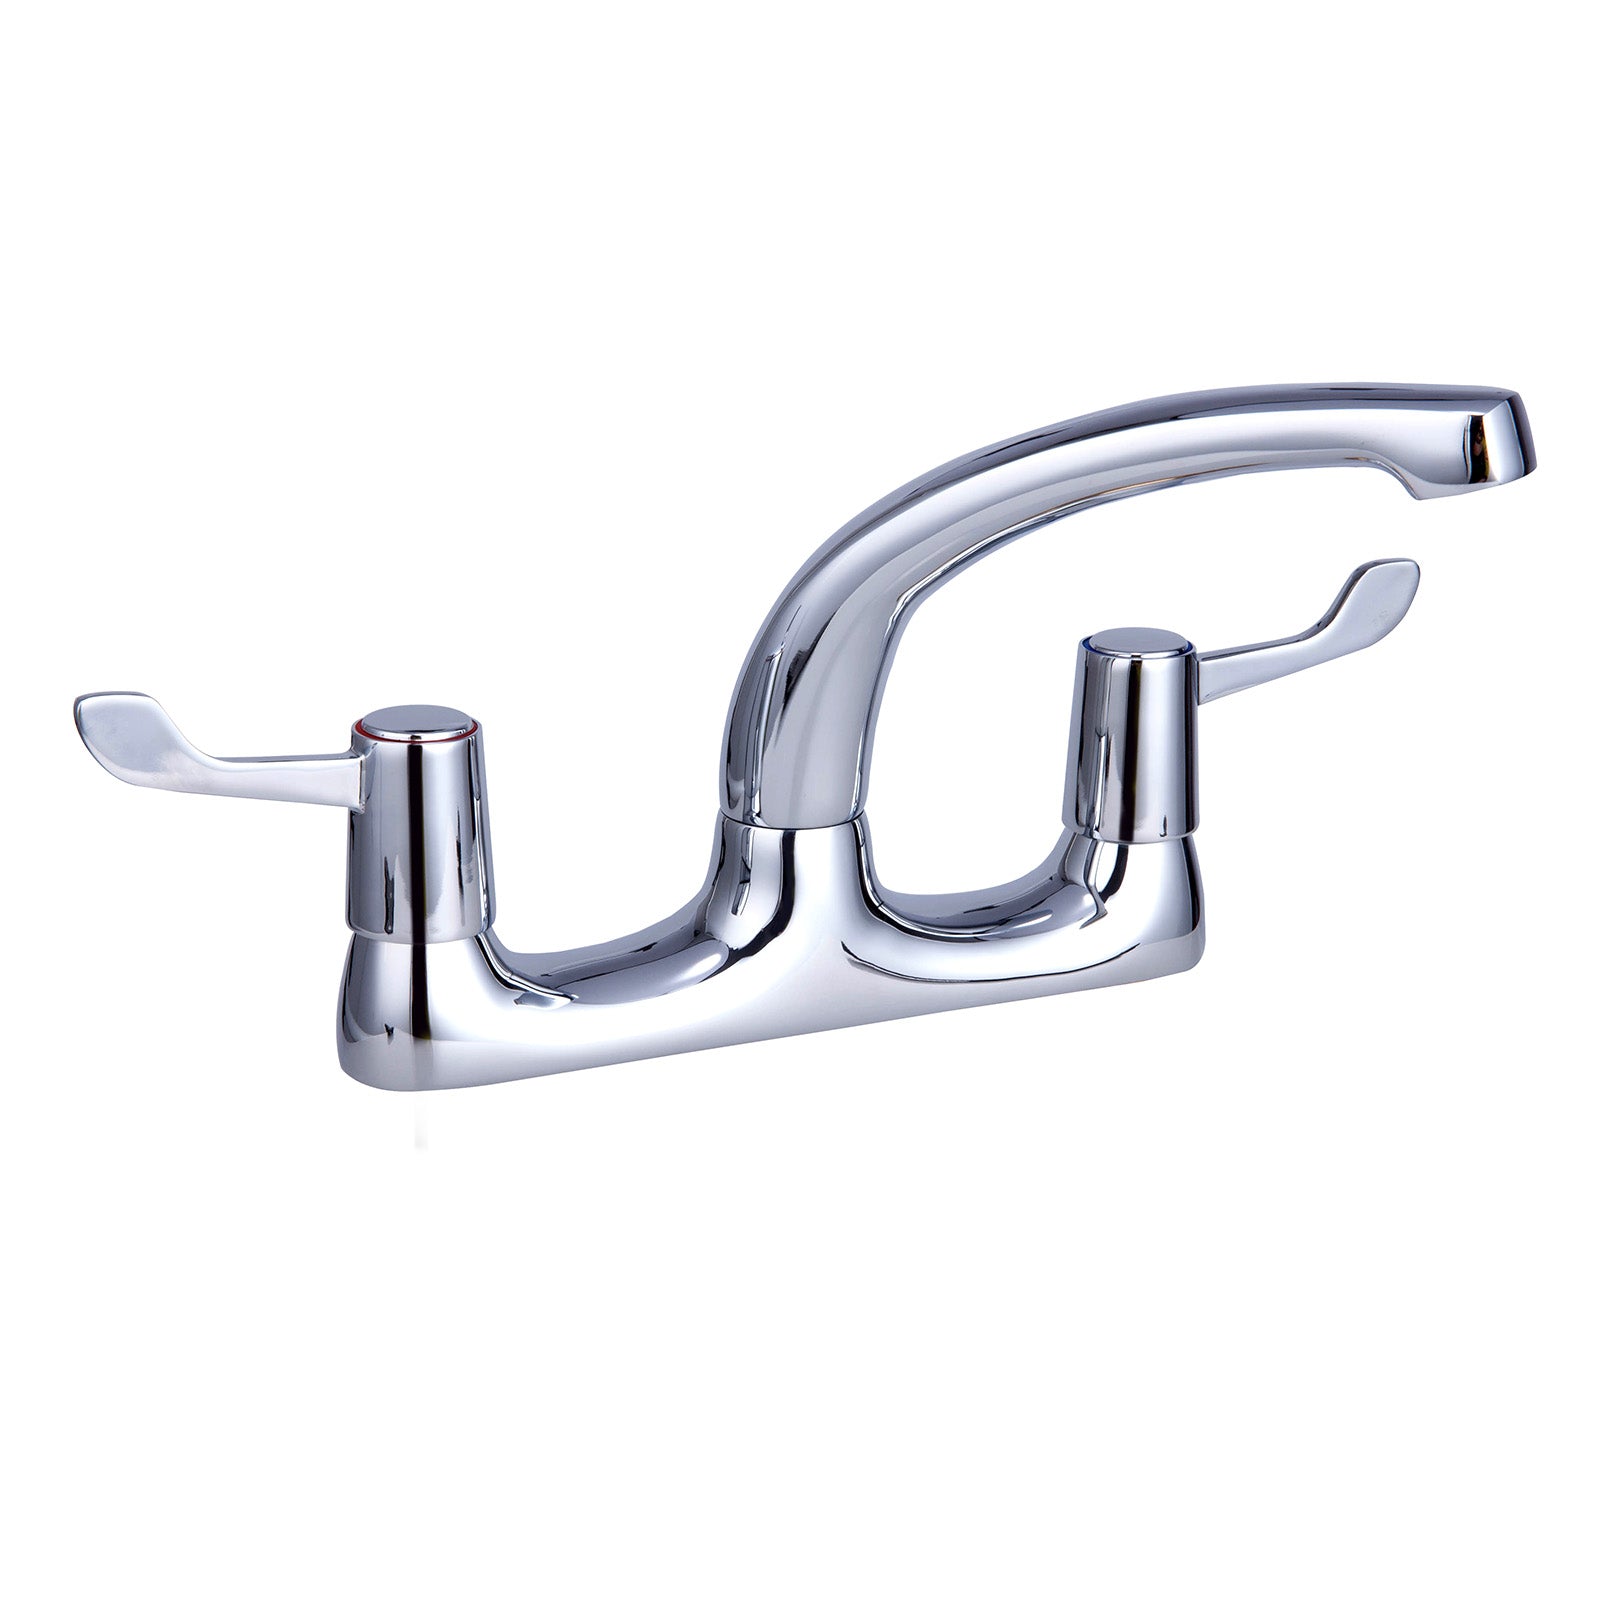 Accessible Chrome Kitchen Deck Mounted Sink Mixer Tap